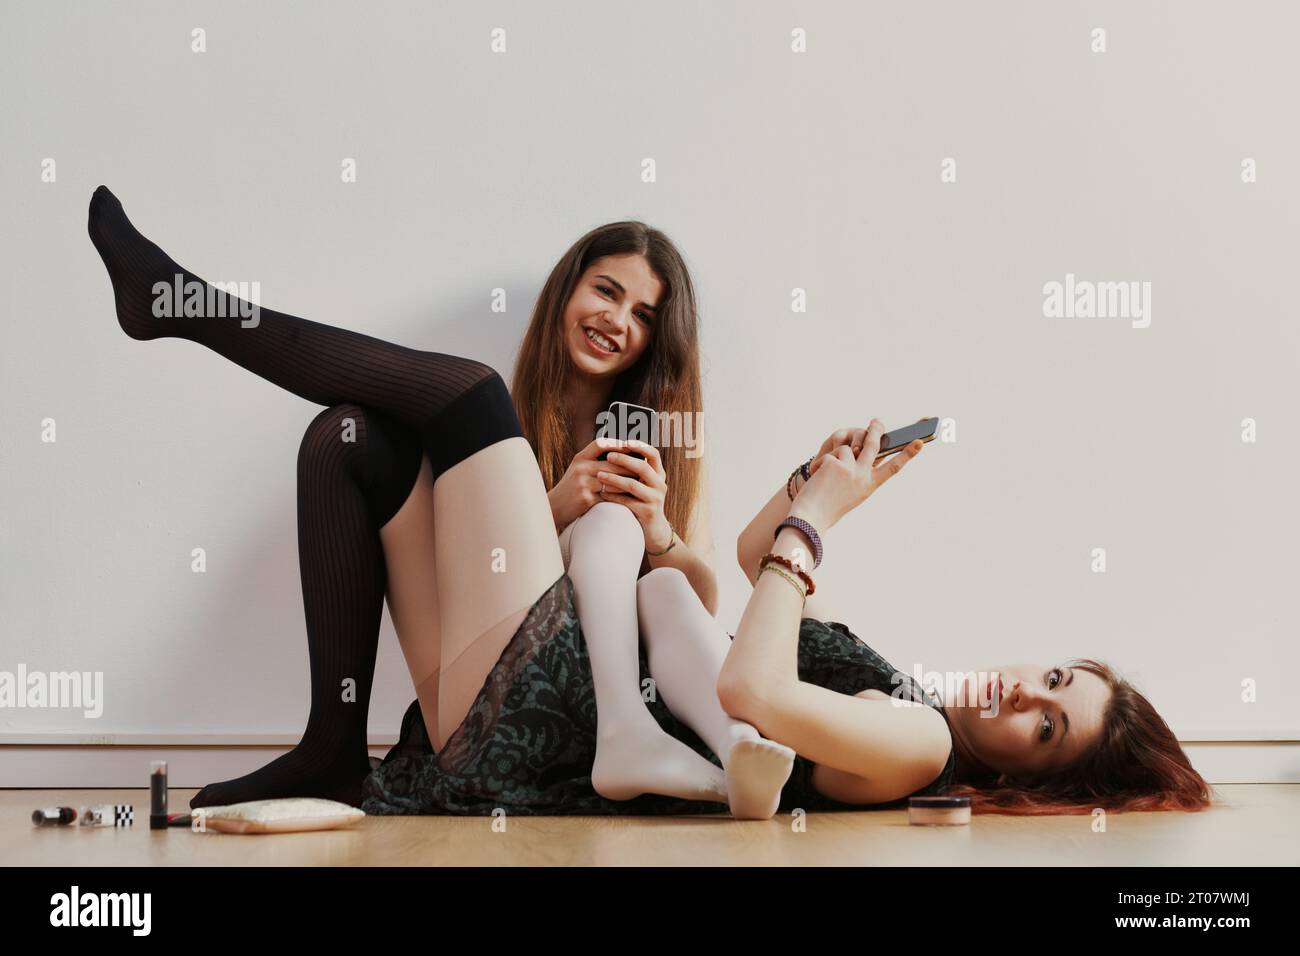 Reveling in youth, two women embrace self-expression, aware that societal judgments may later confine them Stock Photo